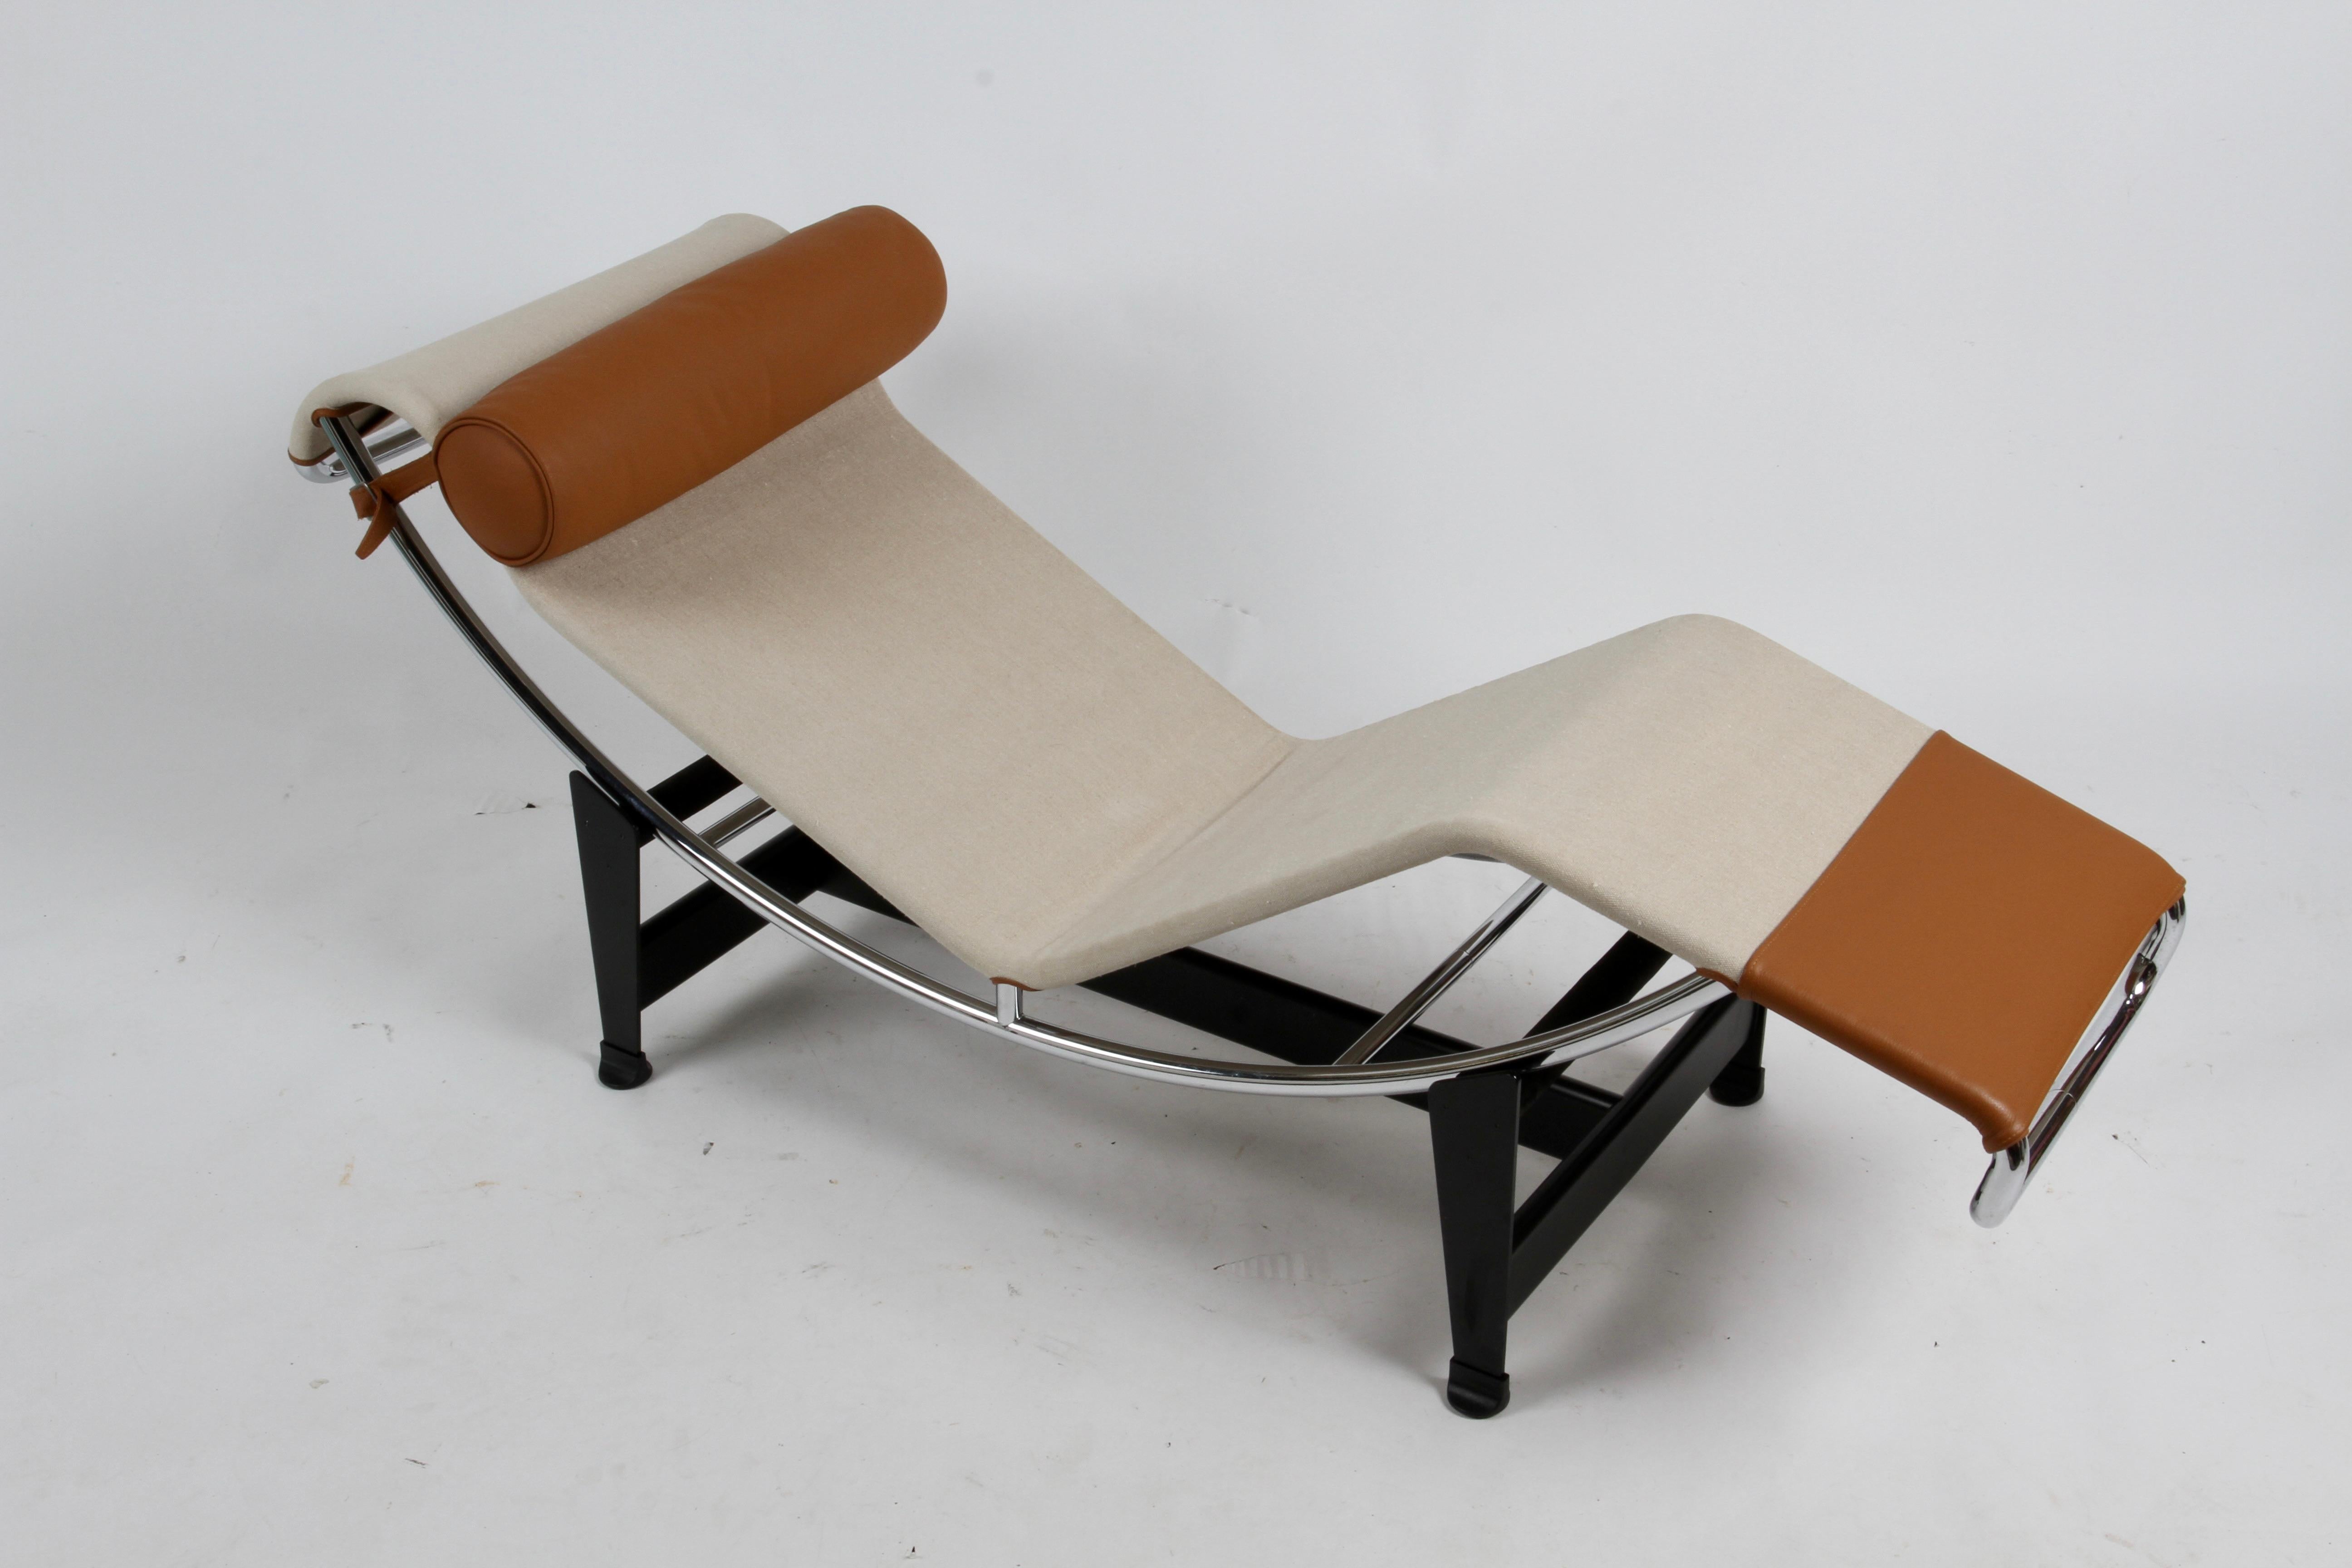 Steel Lc4 Chaise Lounge Canvas & Leather, Charlotte Perriand & Le Corbusier, Cassina